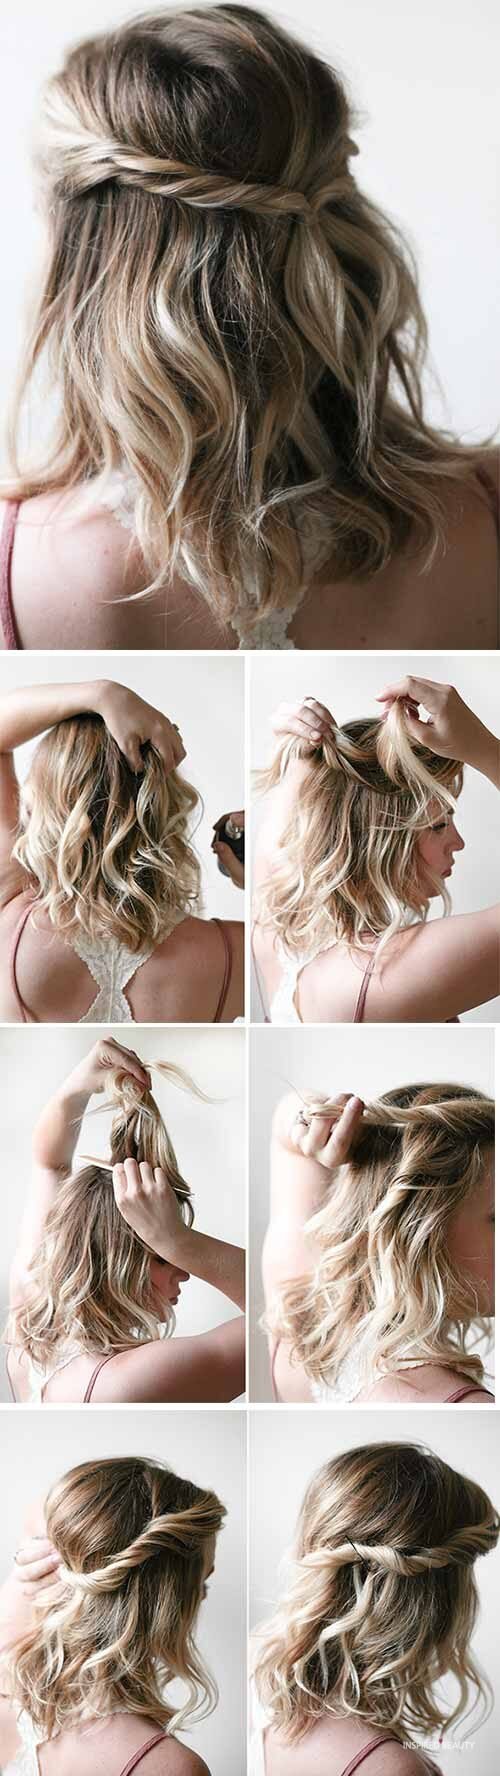 Easy hairstyles for school for short hair